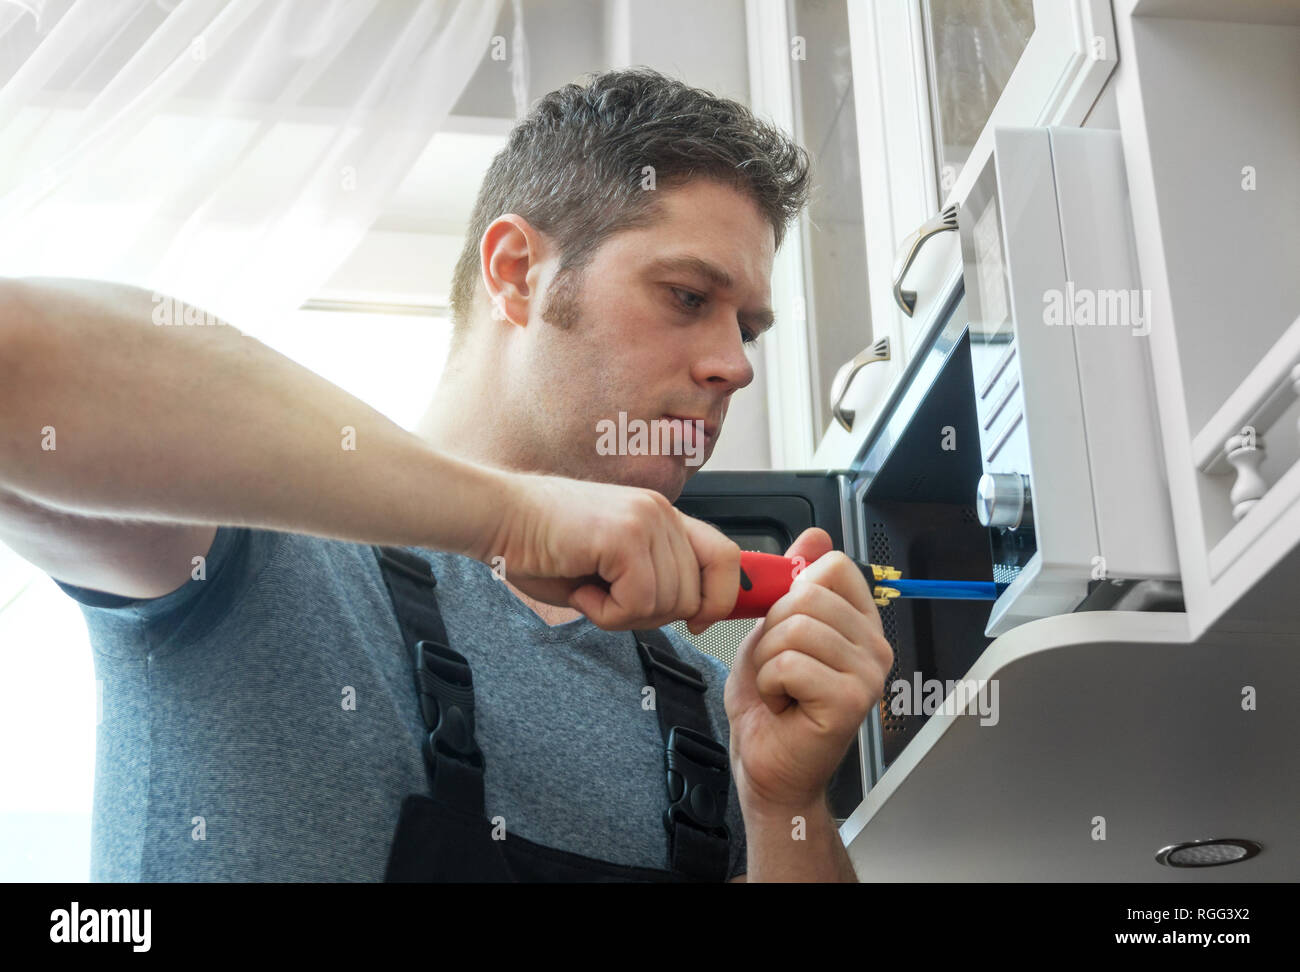 Male technician repairing microwave oven at home. Stock Photo